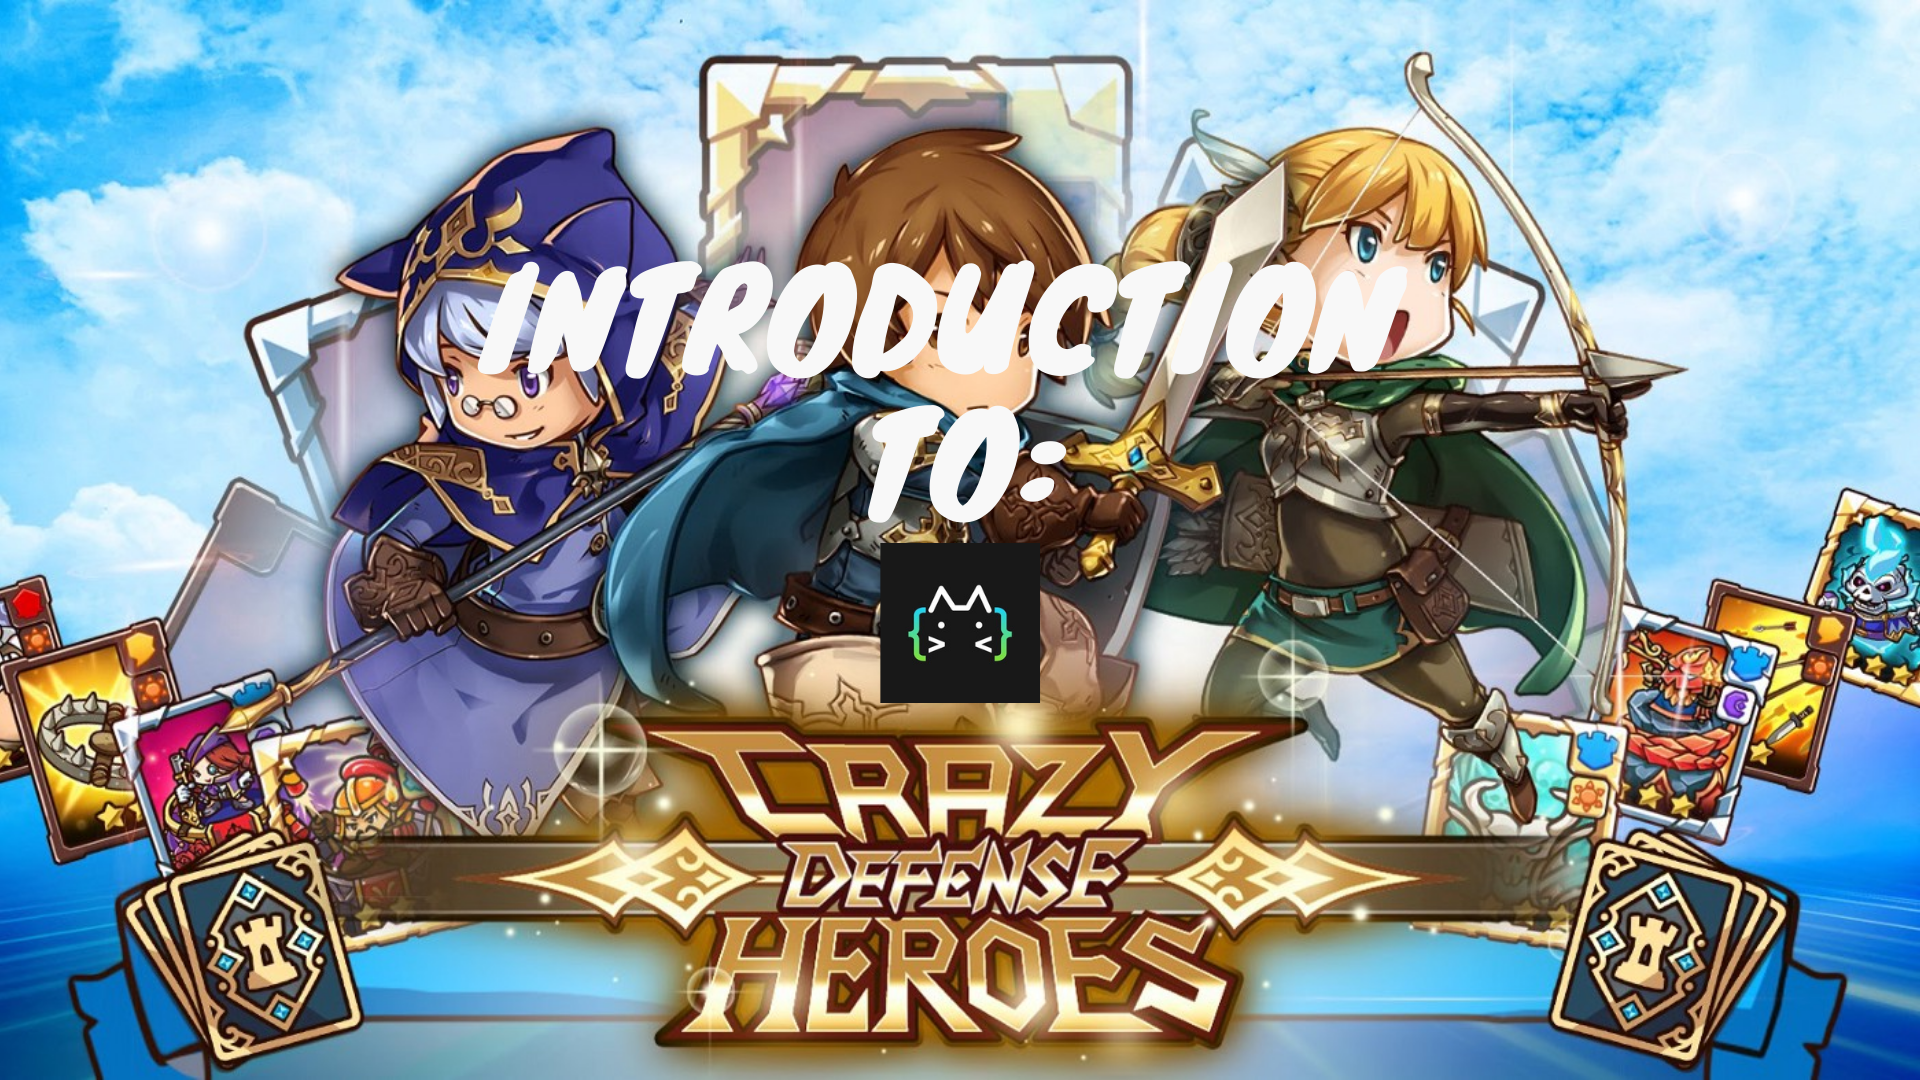 Introduction to crazy defense heroes